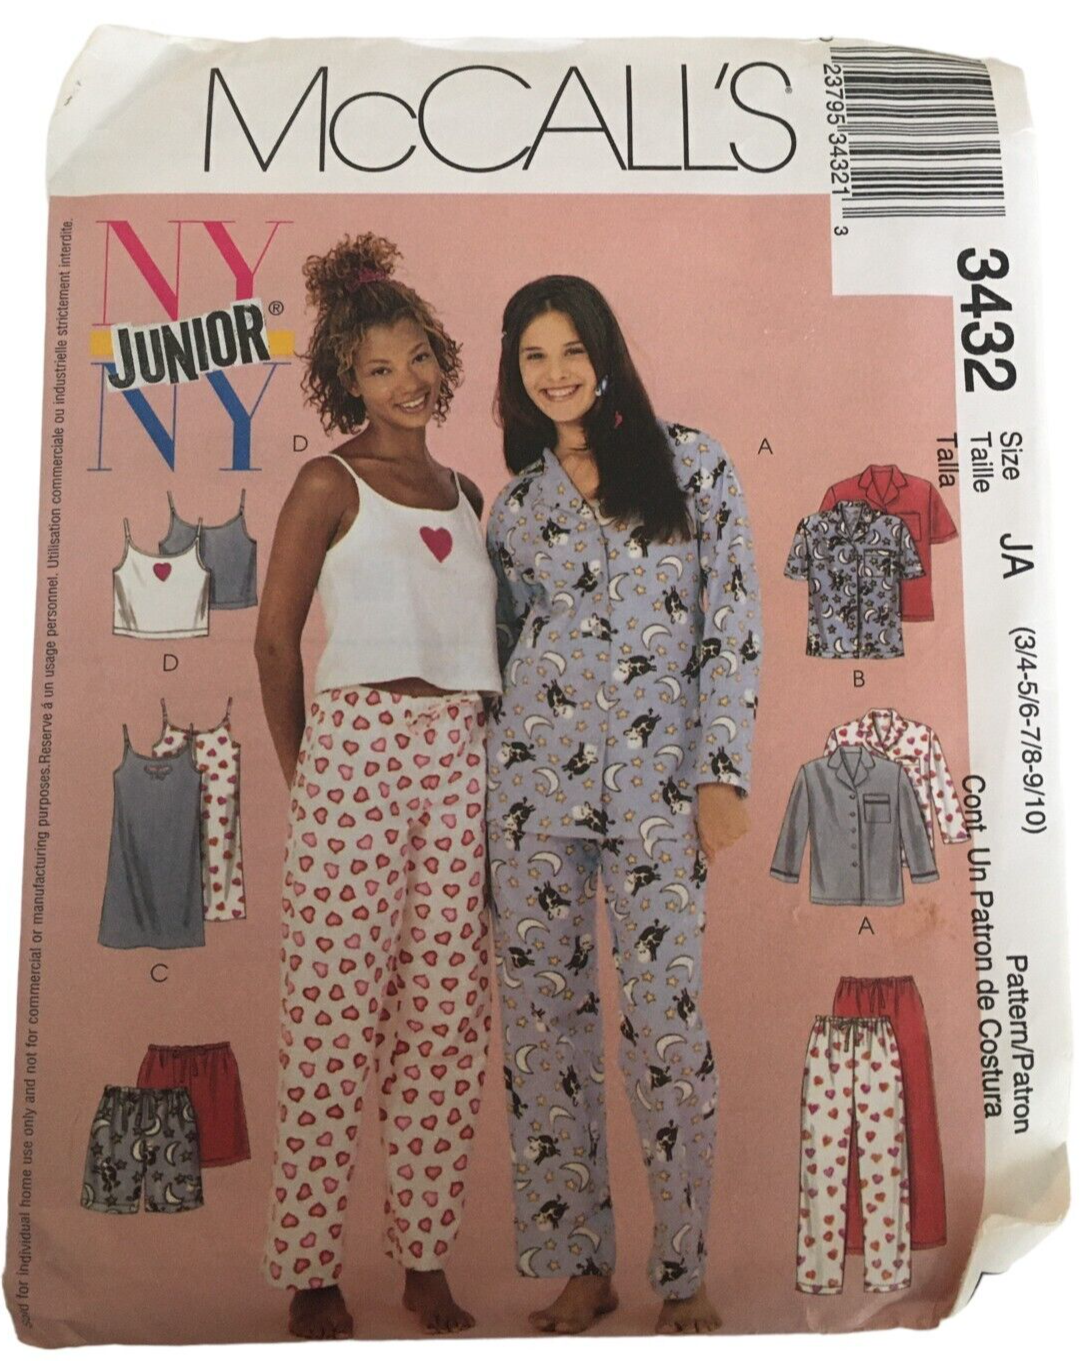 Primary image for McCalls Sewing Pattern 3432 Juniors Pajamas Top Pants Nightgown Camisole Shorts